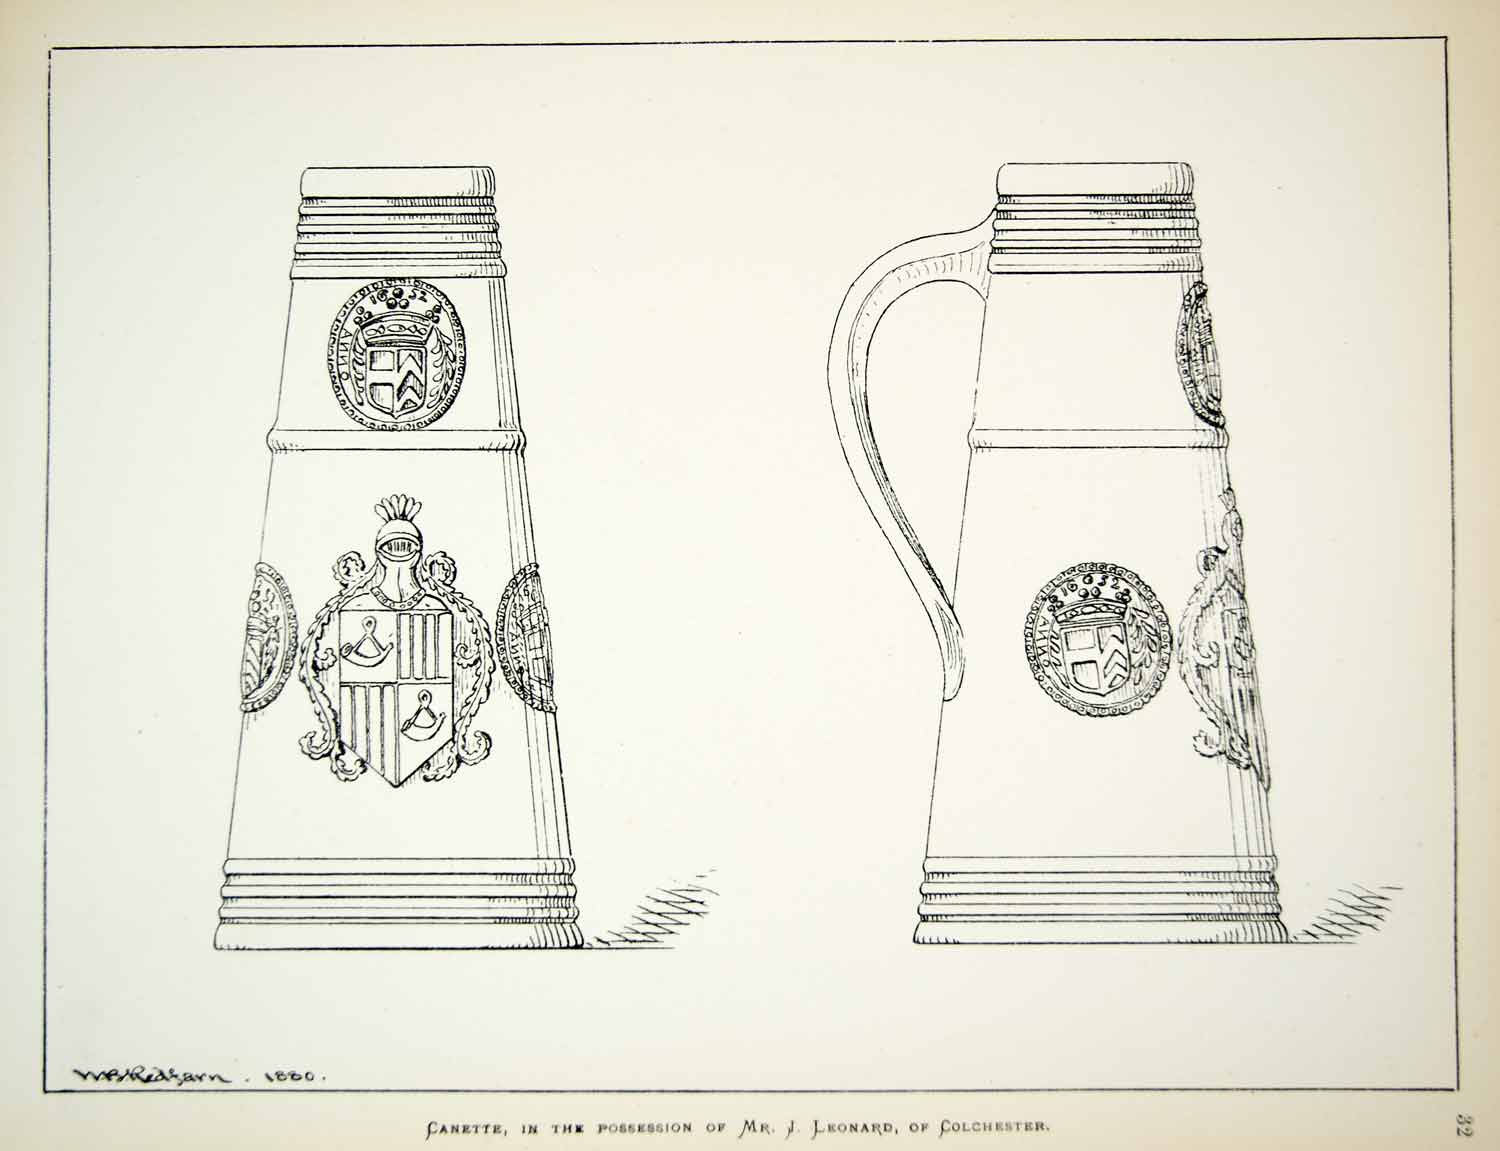 1880 Lithograph WB Redfarn Art English Canette Drink Tankard Cup Household ZZ17